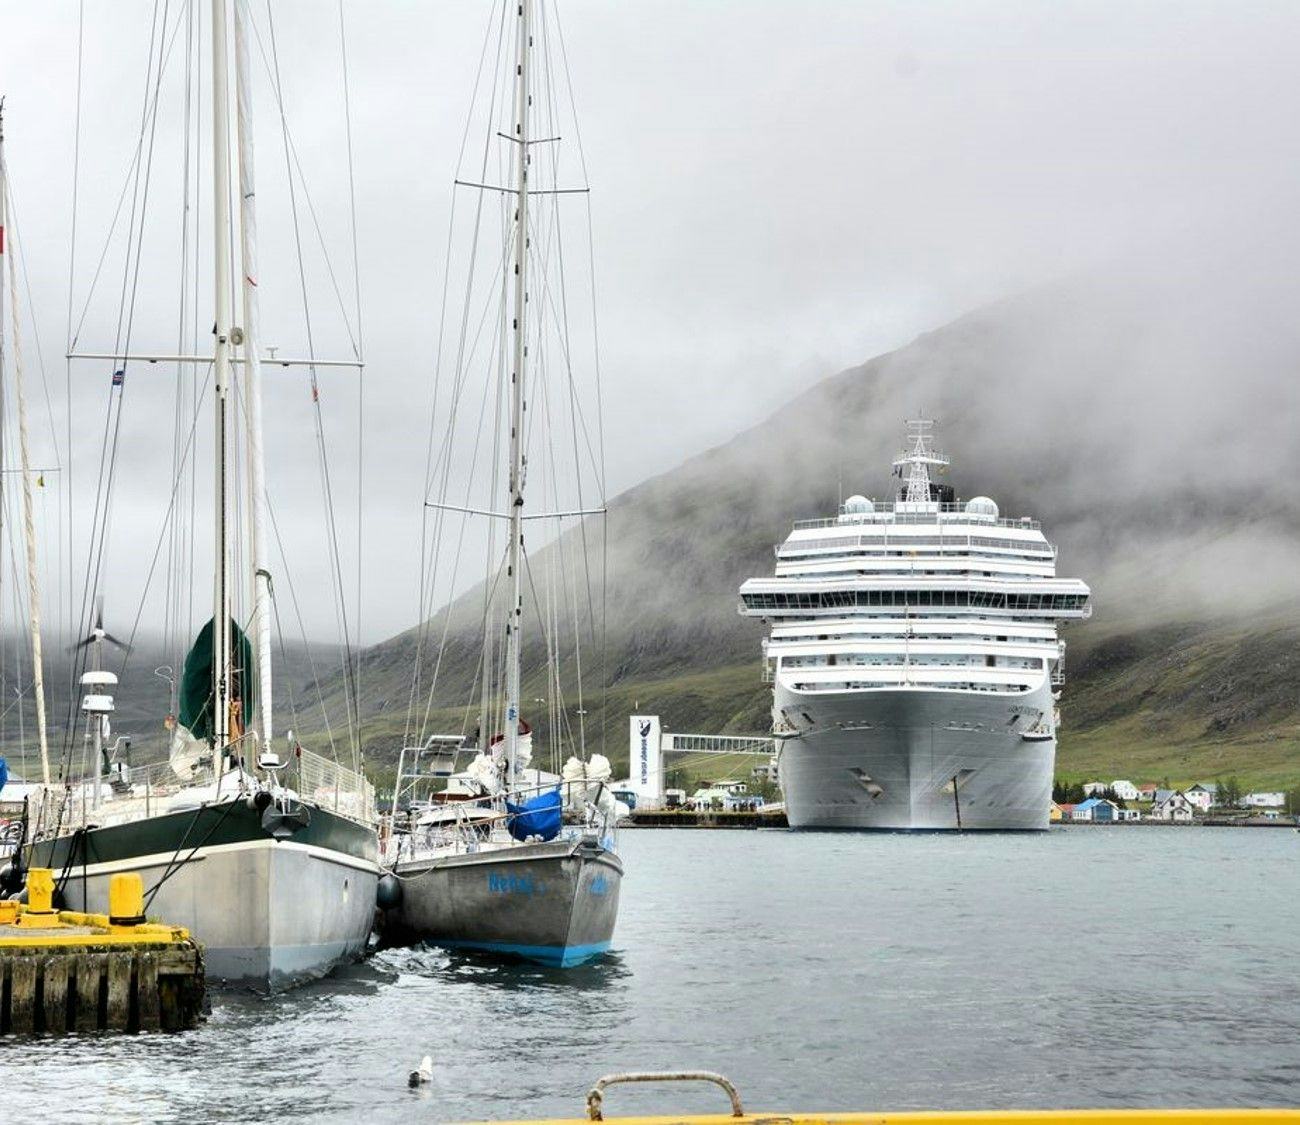 A large cruise ship docked near a coast and two small boats